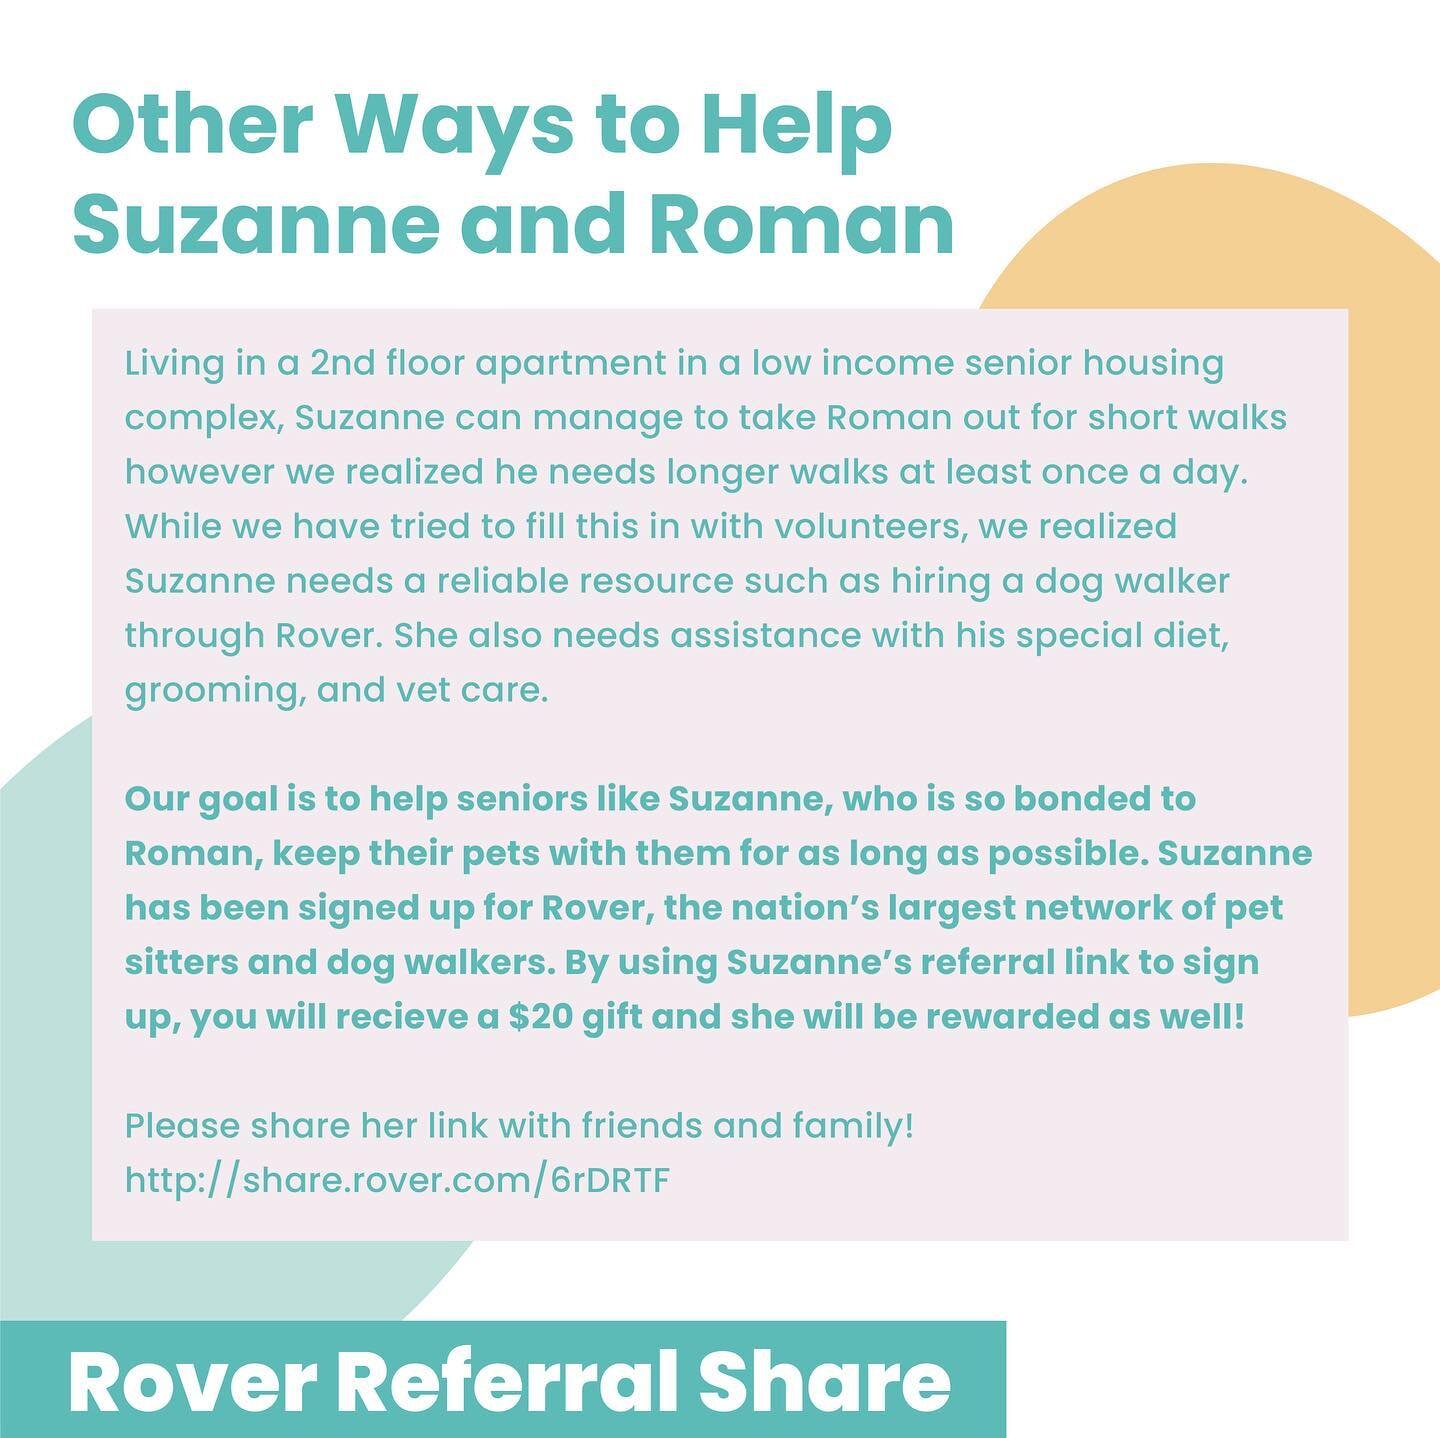 Other Ways to Help Support Suzanne and her baby Roman 💛

Meet Miss Suzanne (84 y/o) and Roman, a 5 y/o schnauzer /poodle mix she had adopted from the local humane society when he was about 6 months old. Having lost her only son, with no other family